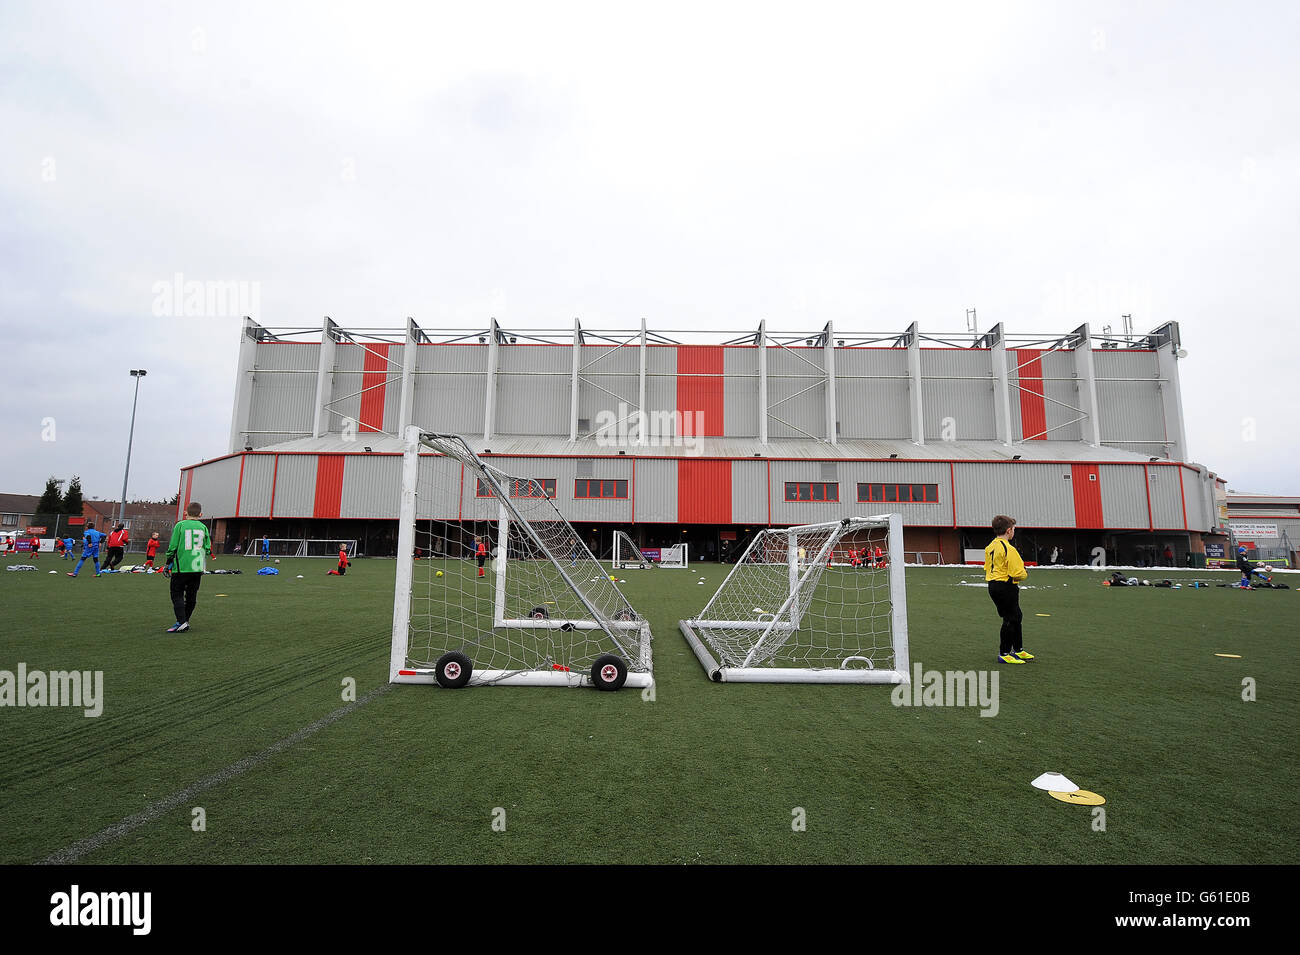 A general view of a children's football match taking place outside the  Banks's Stadium, home of Walsall Stock Photo - Alamy